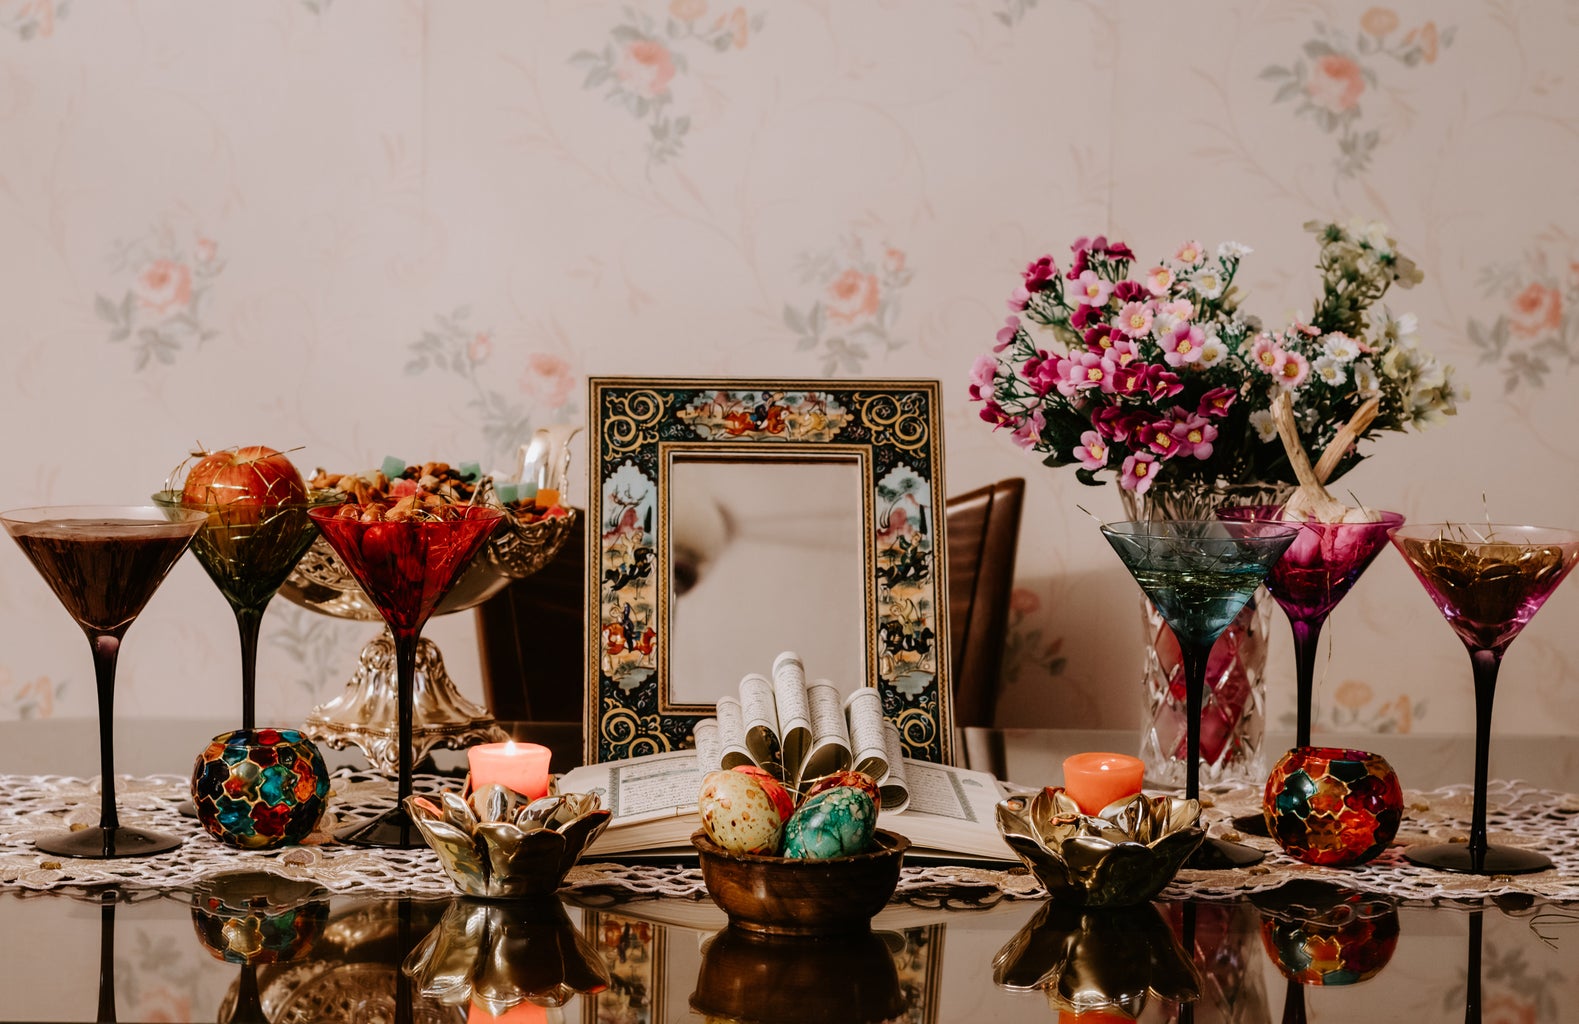 A table filled with cups, flowers, empty frames, flowers, lit candles, and colorful eggs.